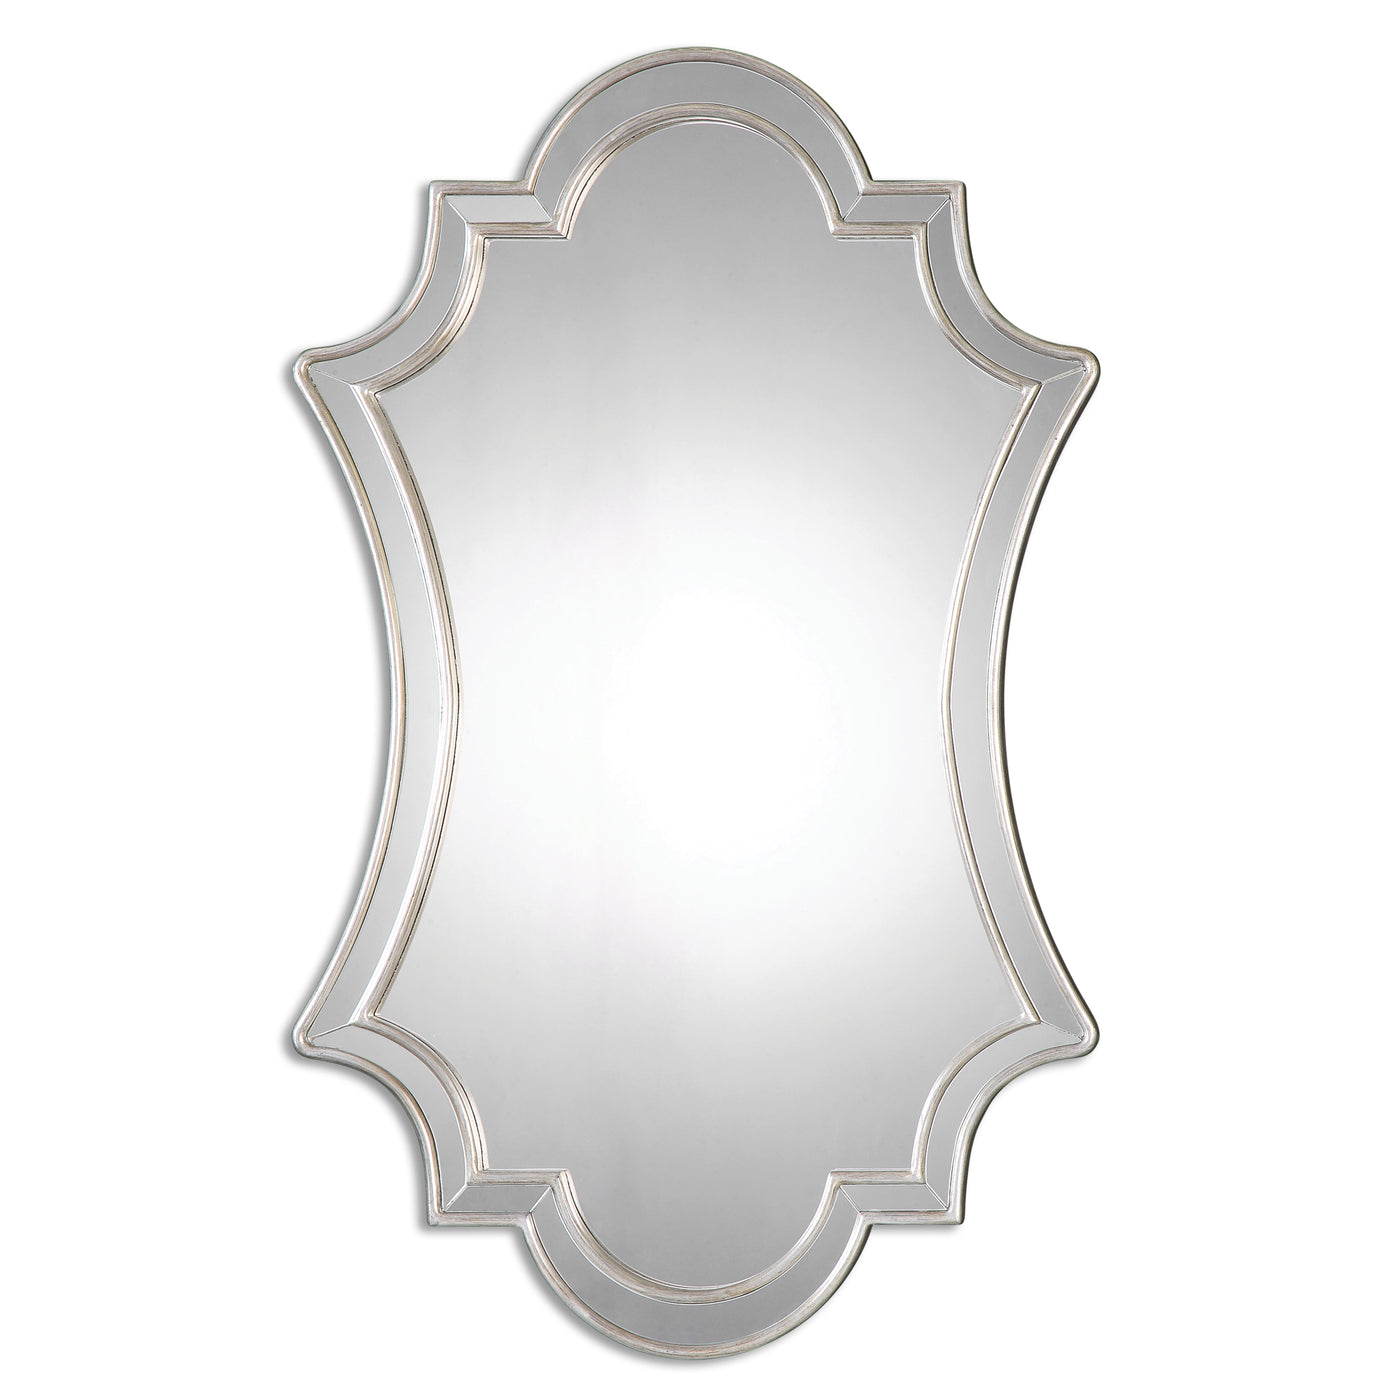 Gracefully Curved Polished Edged Mirror Facets Encased In A Lightly Antiqued Silver Leafed Frame.